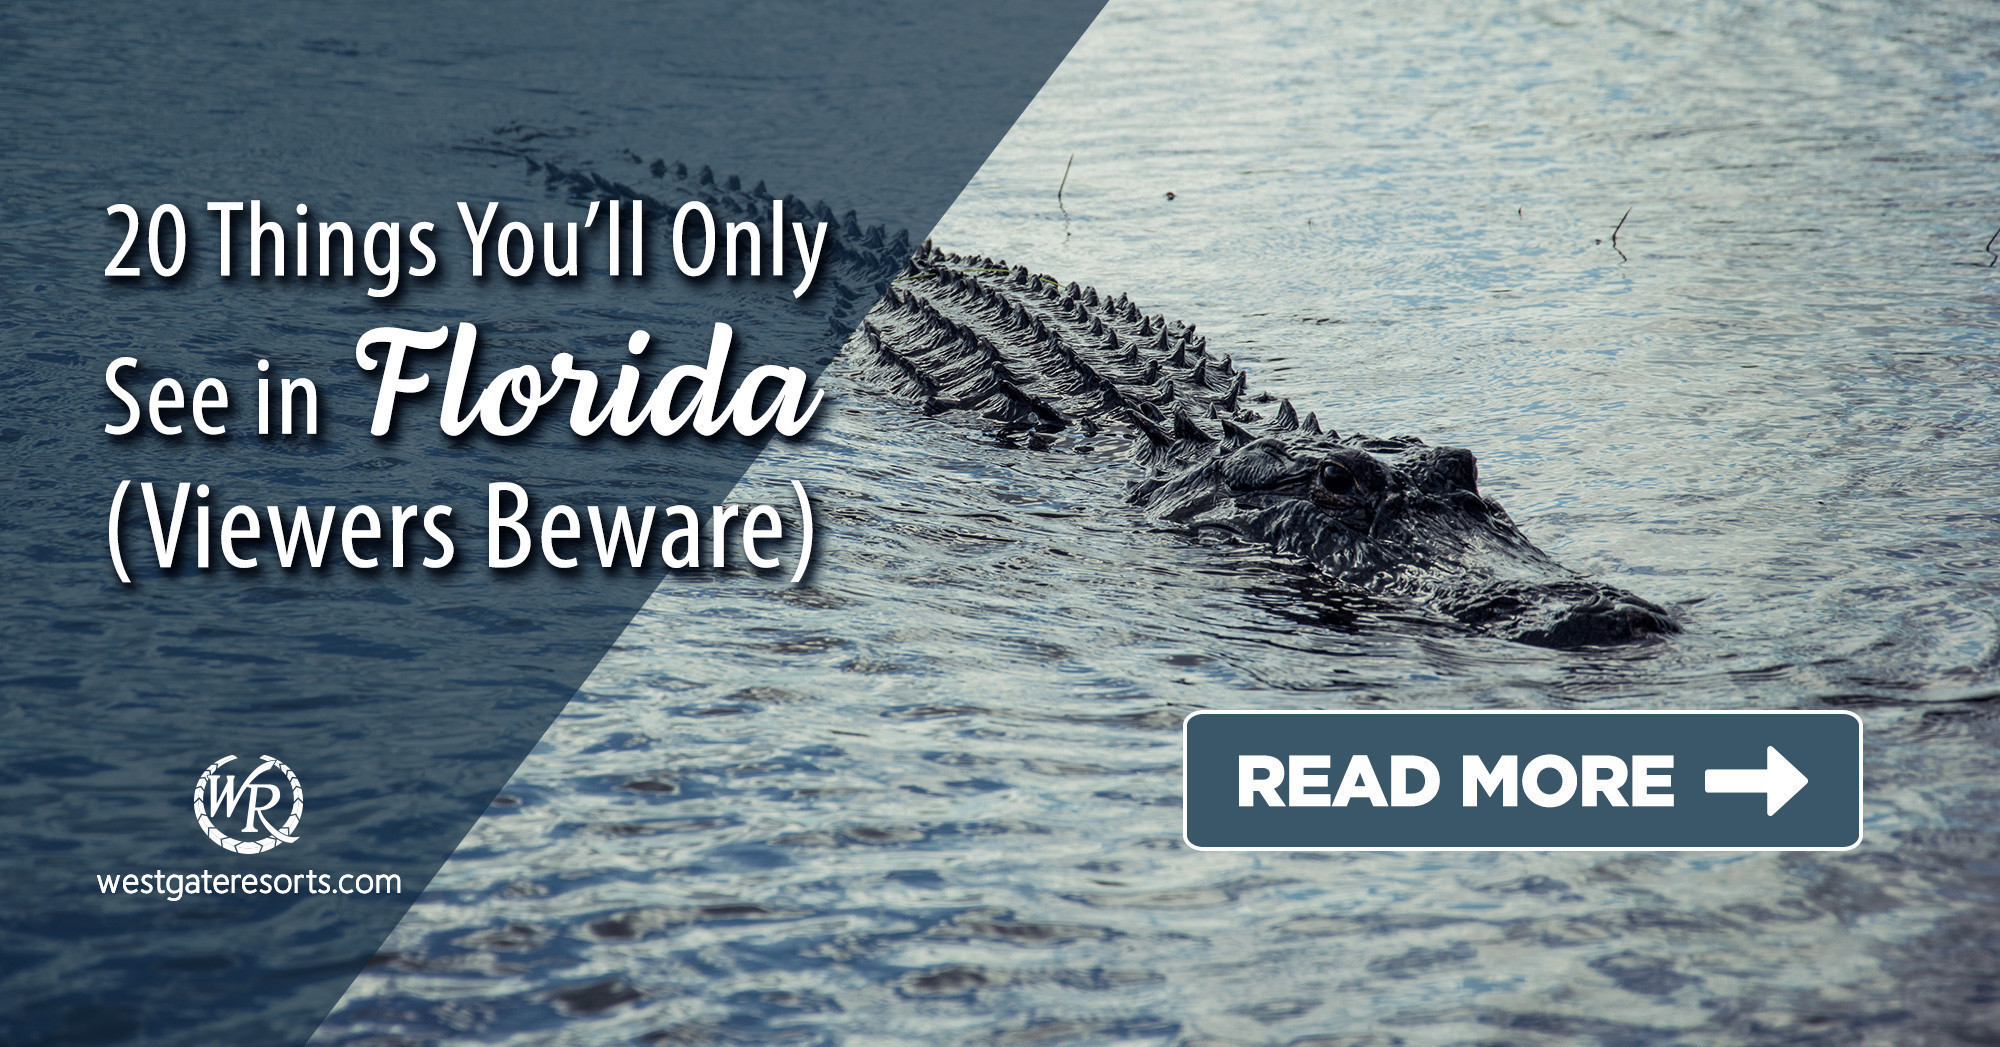 20 Things You’ll Only See in Florida (Viewers Beware) width=